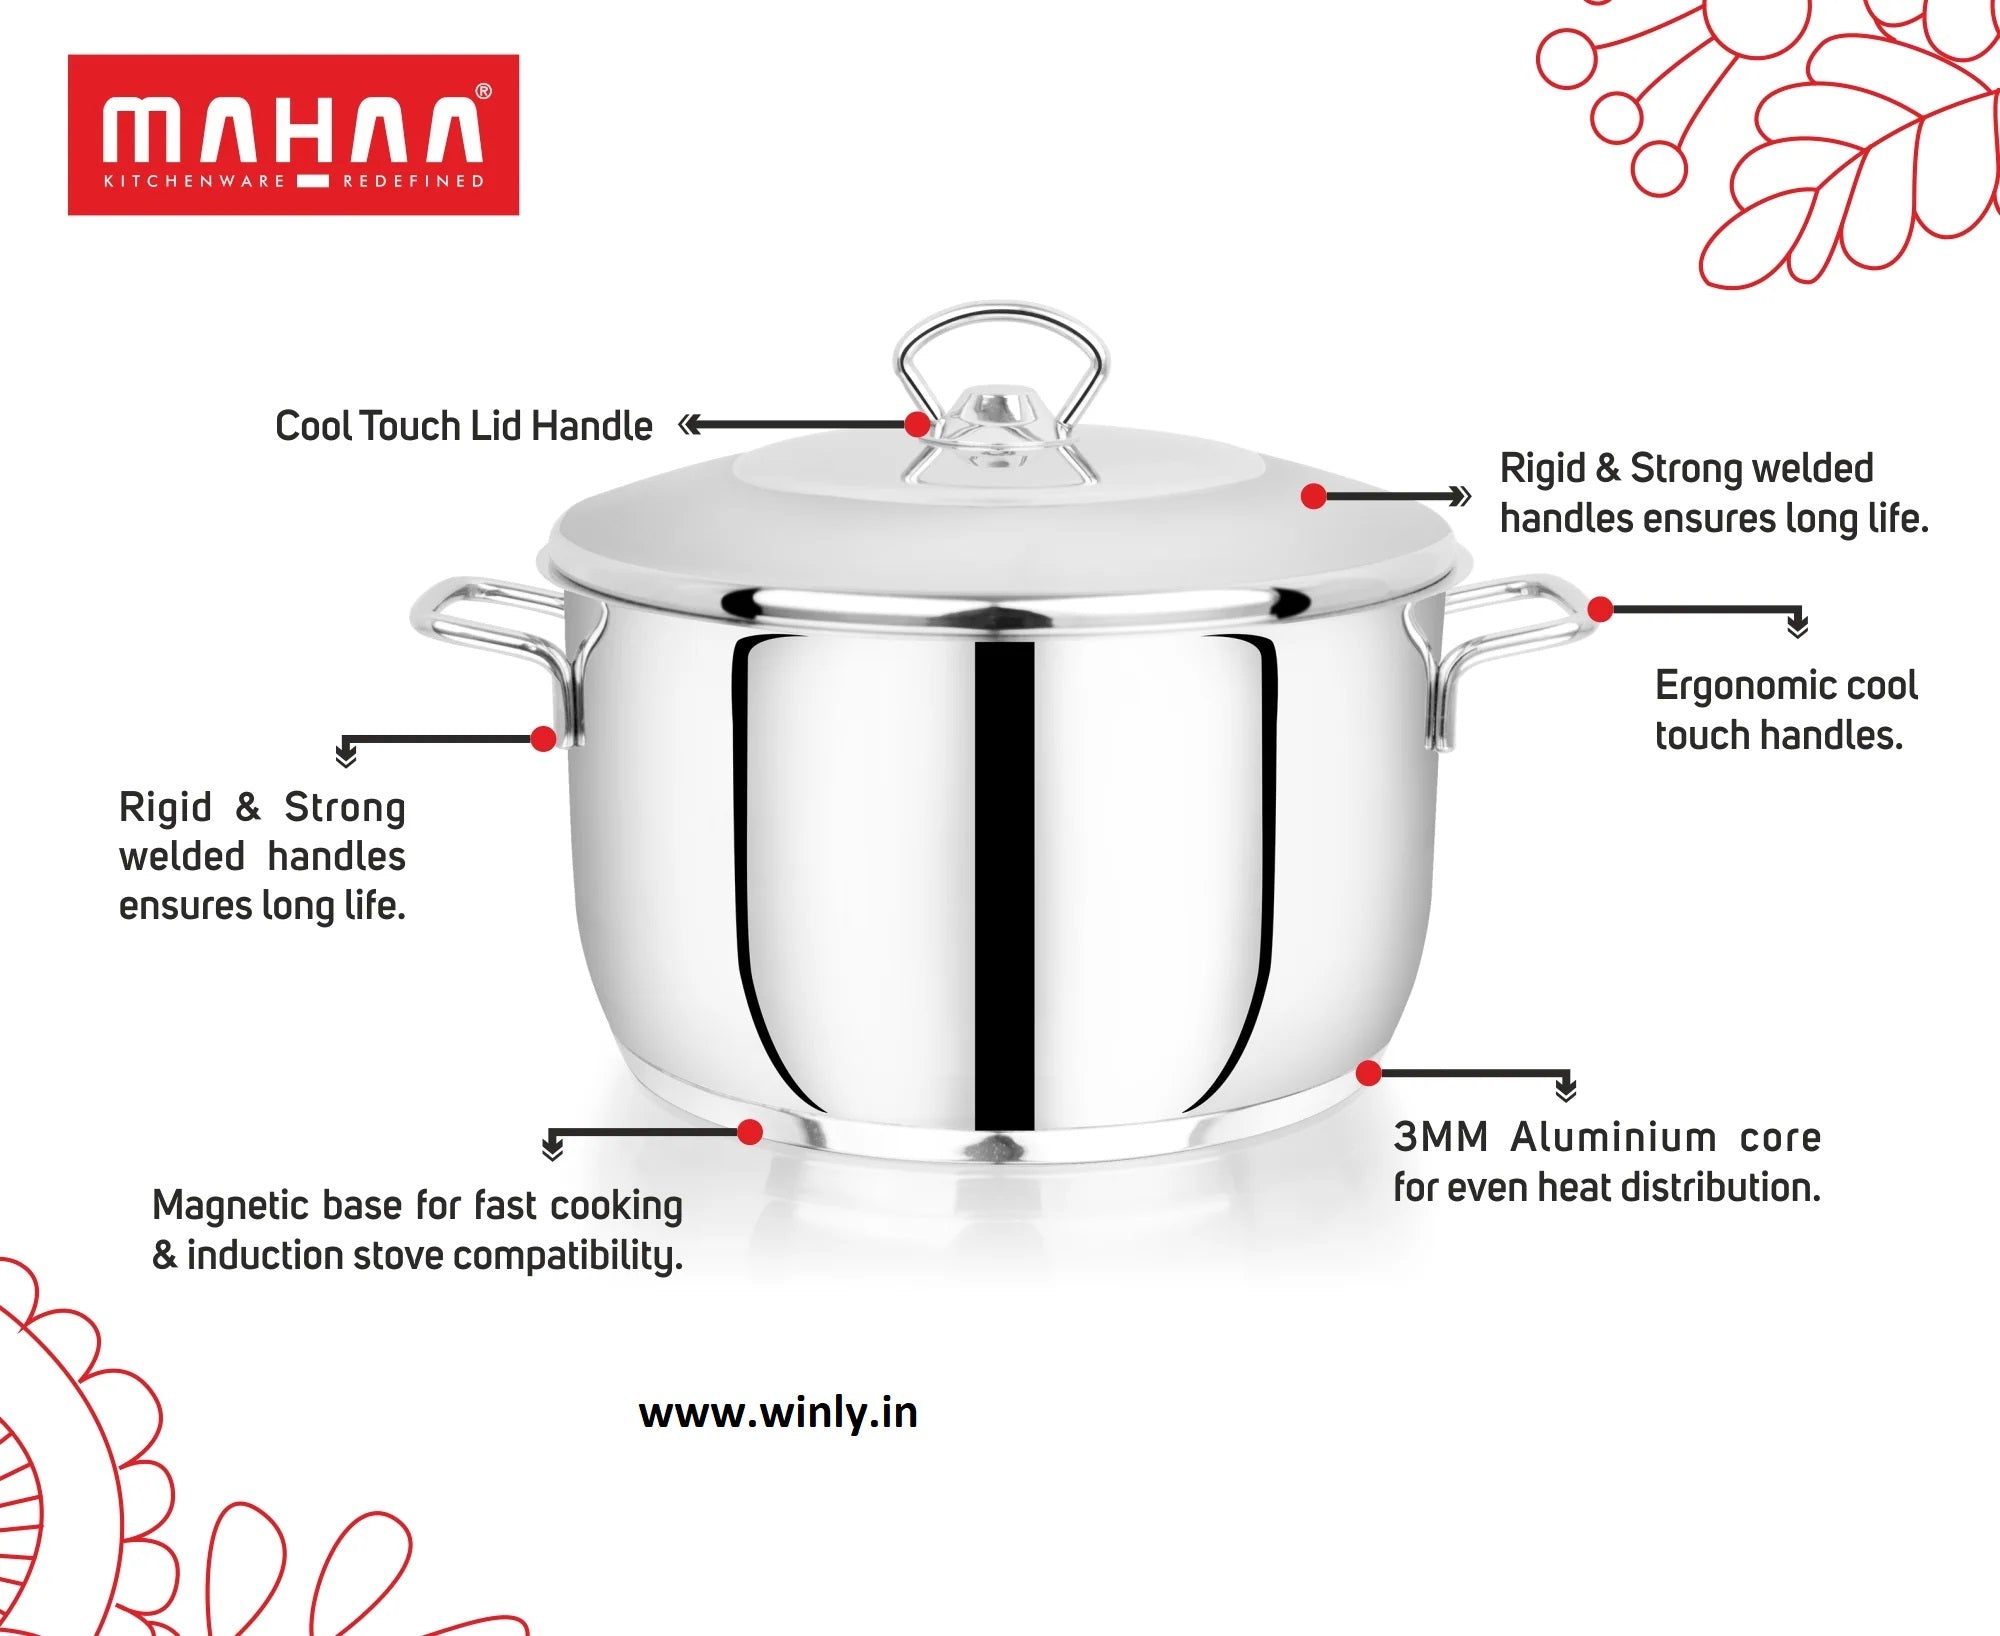 Avanti Cooking Pot / Biryani Pot - Encapsulated Triply Bottom With Lid - Induction And Gas Compatible